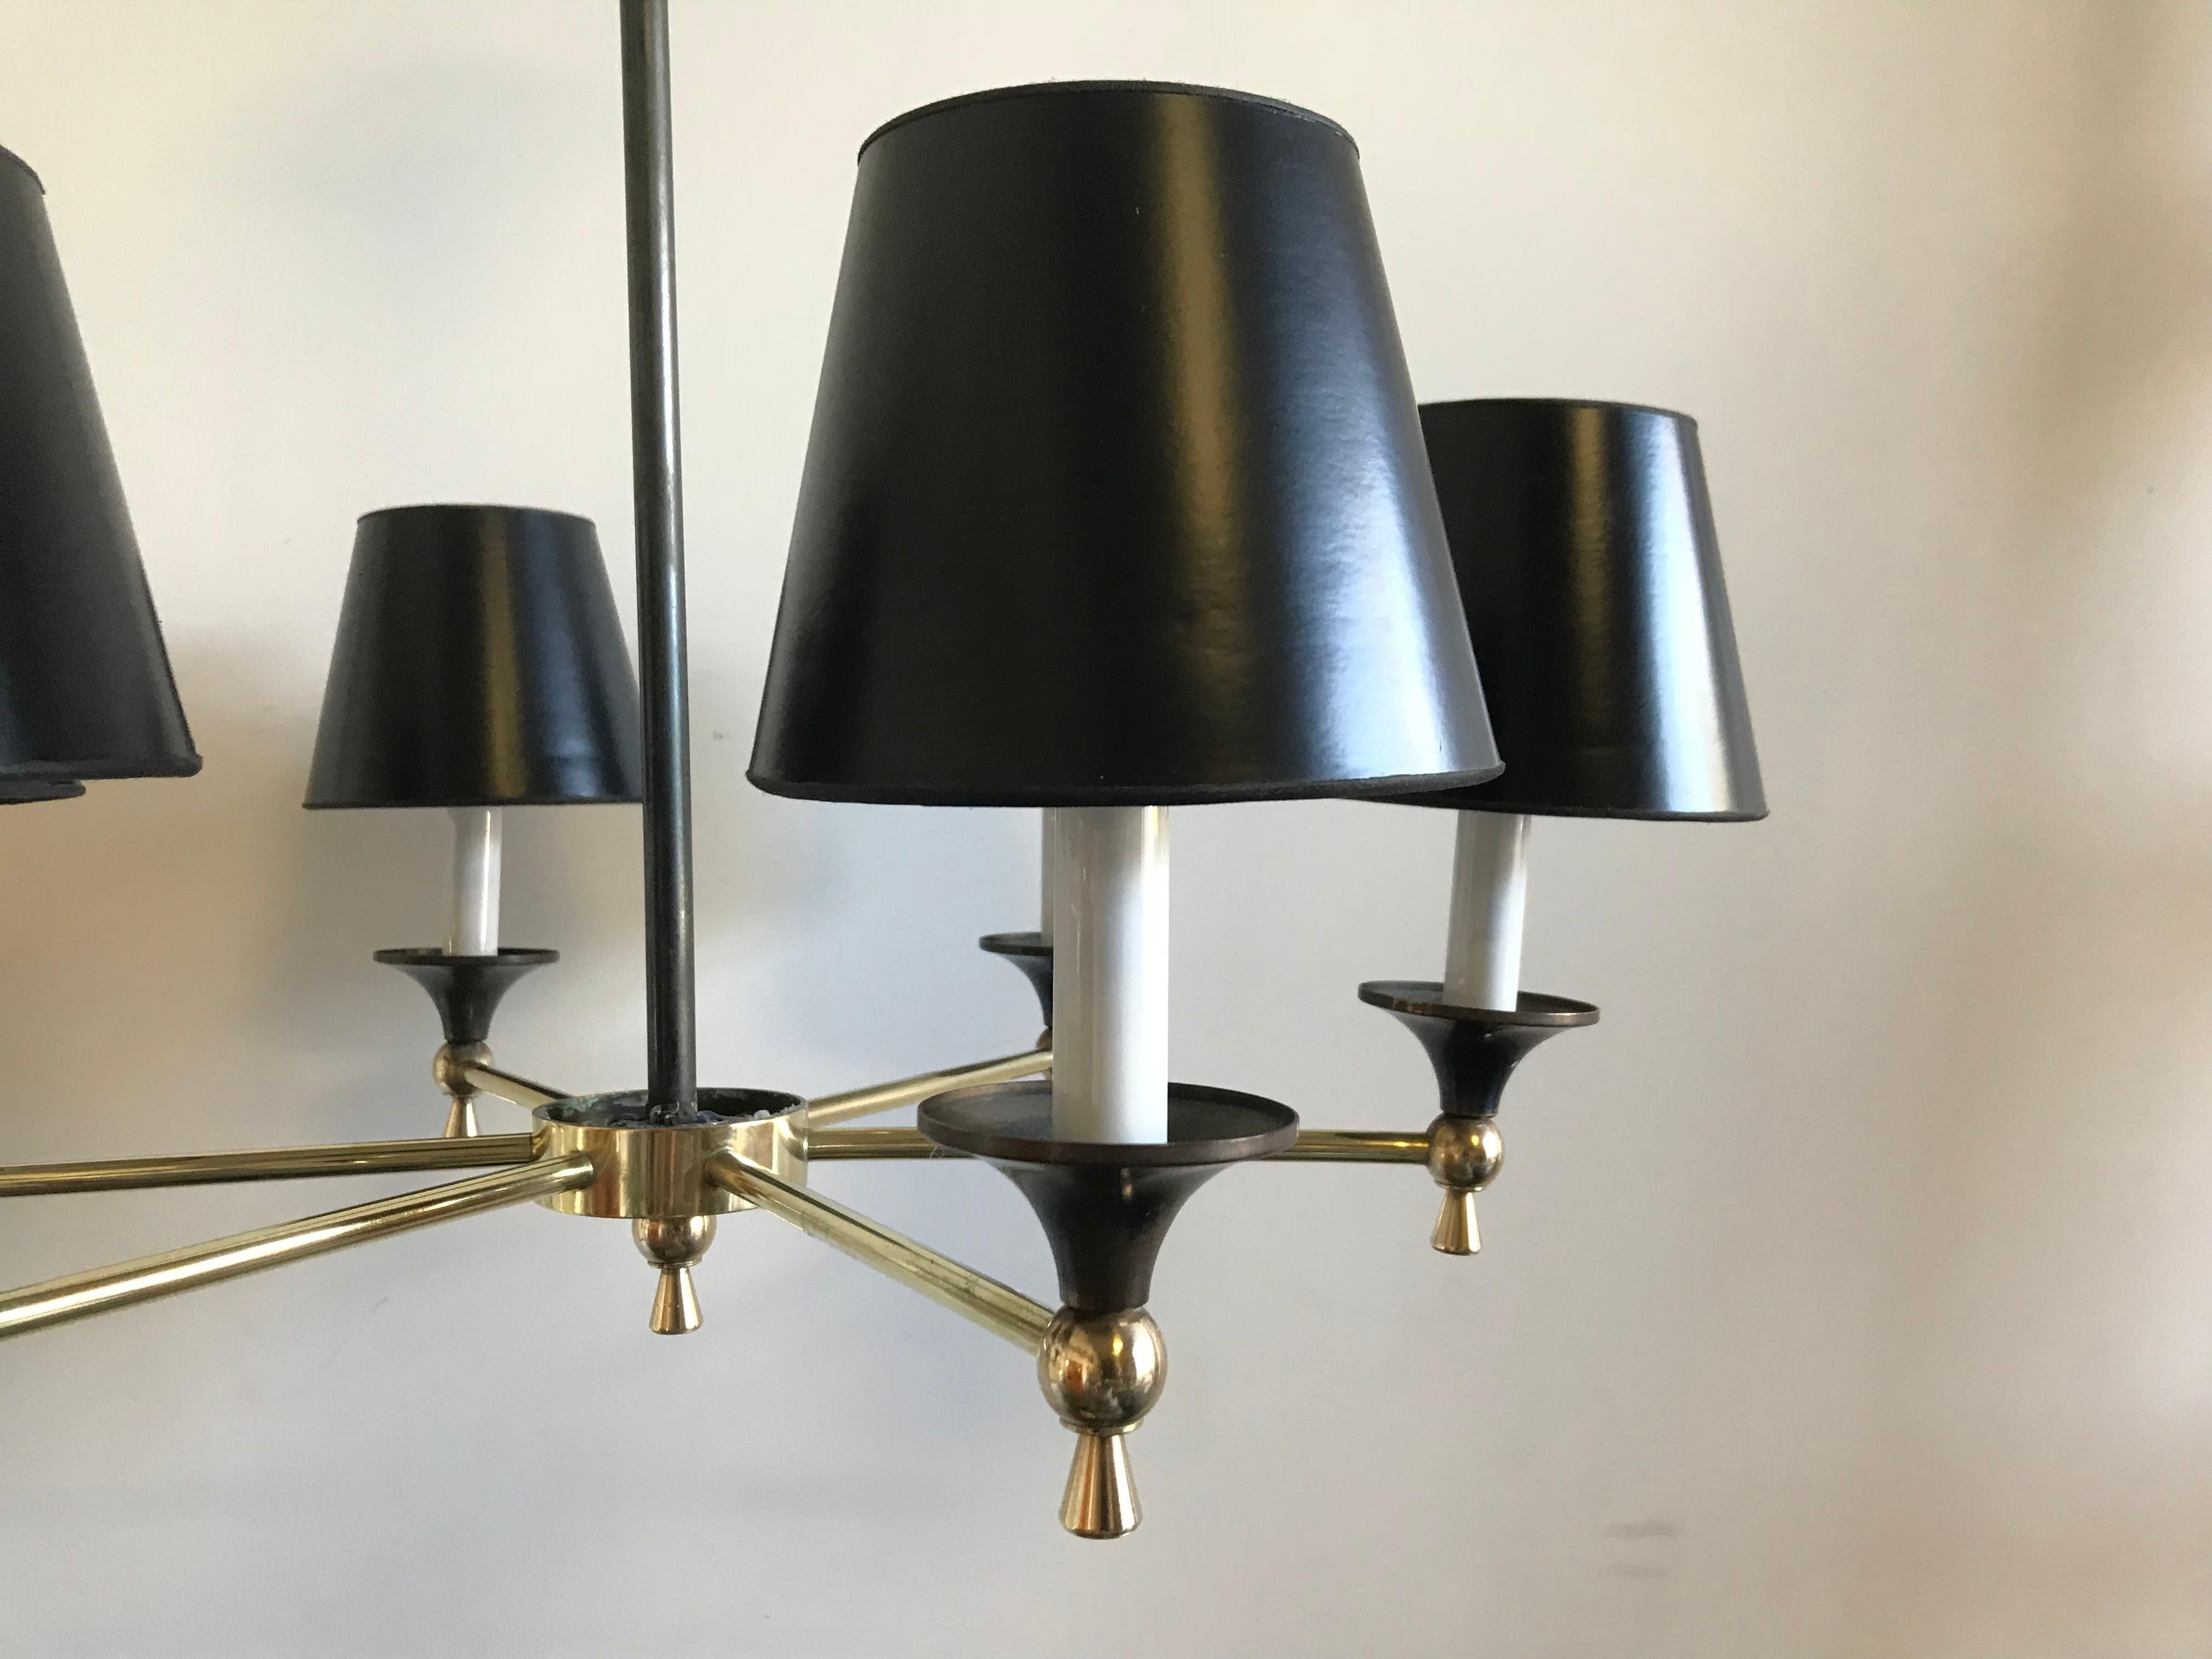 Beautiful brass and steel 6-light chandelier, circa 1950s by Jacques Adnet, Paris - excellent condition.

Adnet is a distinctive figure of French 20th century design born in France in 1901. He believed in the functional aspect of furniture combined